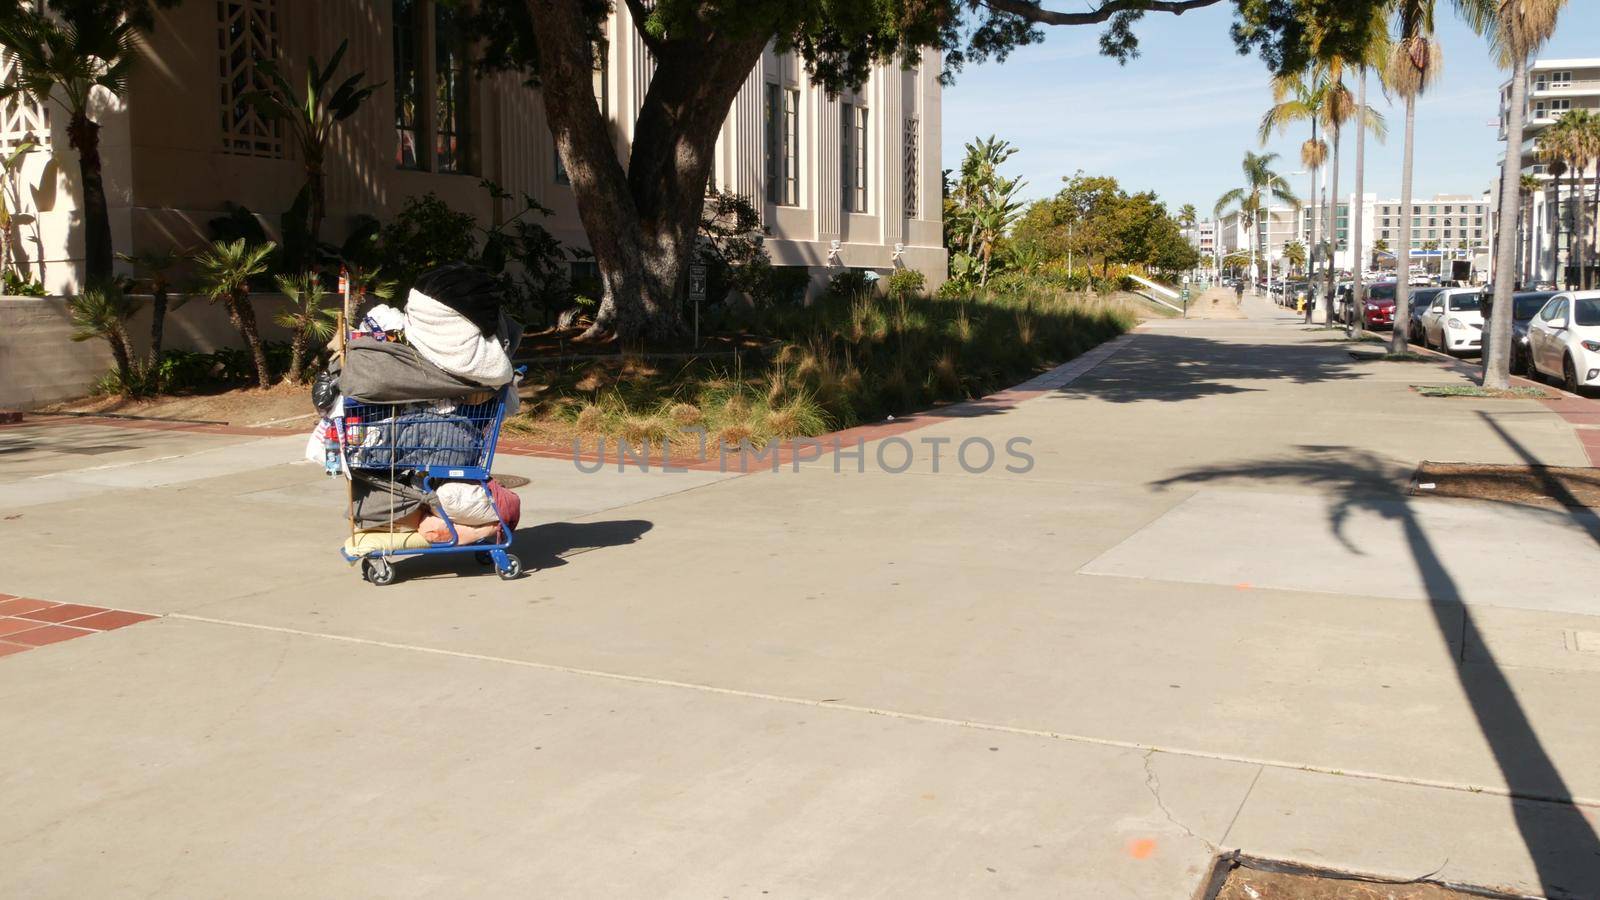 SAN DIEGO, CALIFORNIA USA - 30 JAN 2020: Stuff of homeless street people on walkway, truck on roadside. Begging problem in downtown of city near Los Angeles. Jobless beggars trolley cart on pavement.